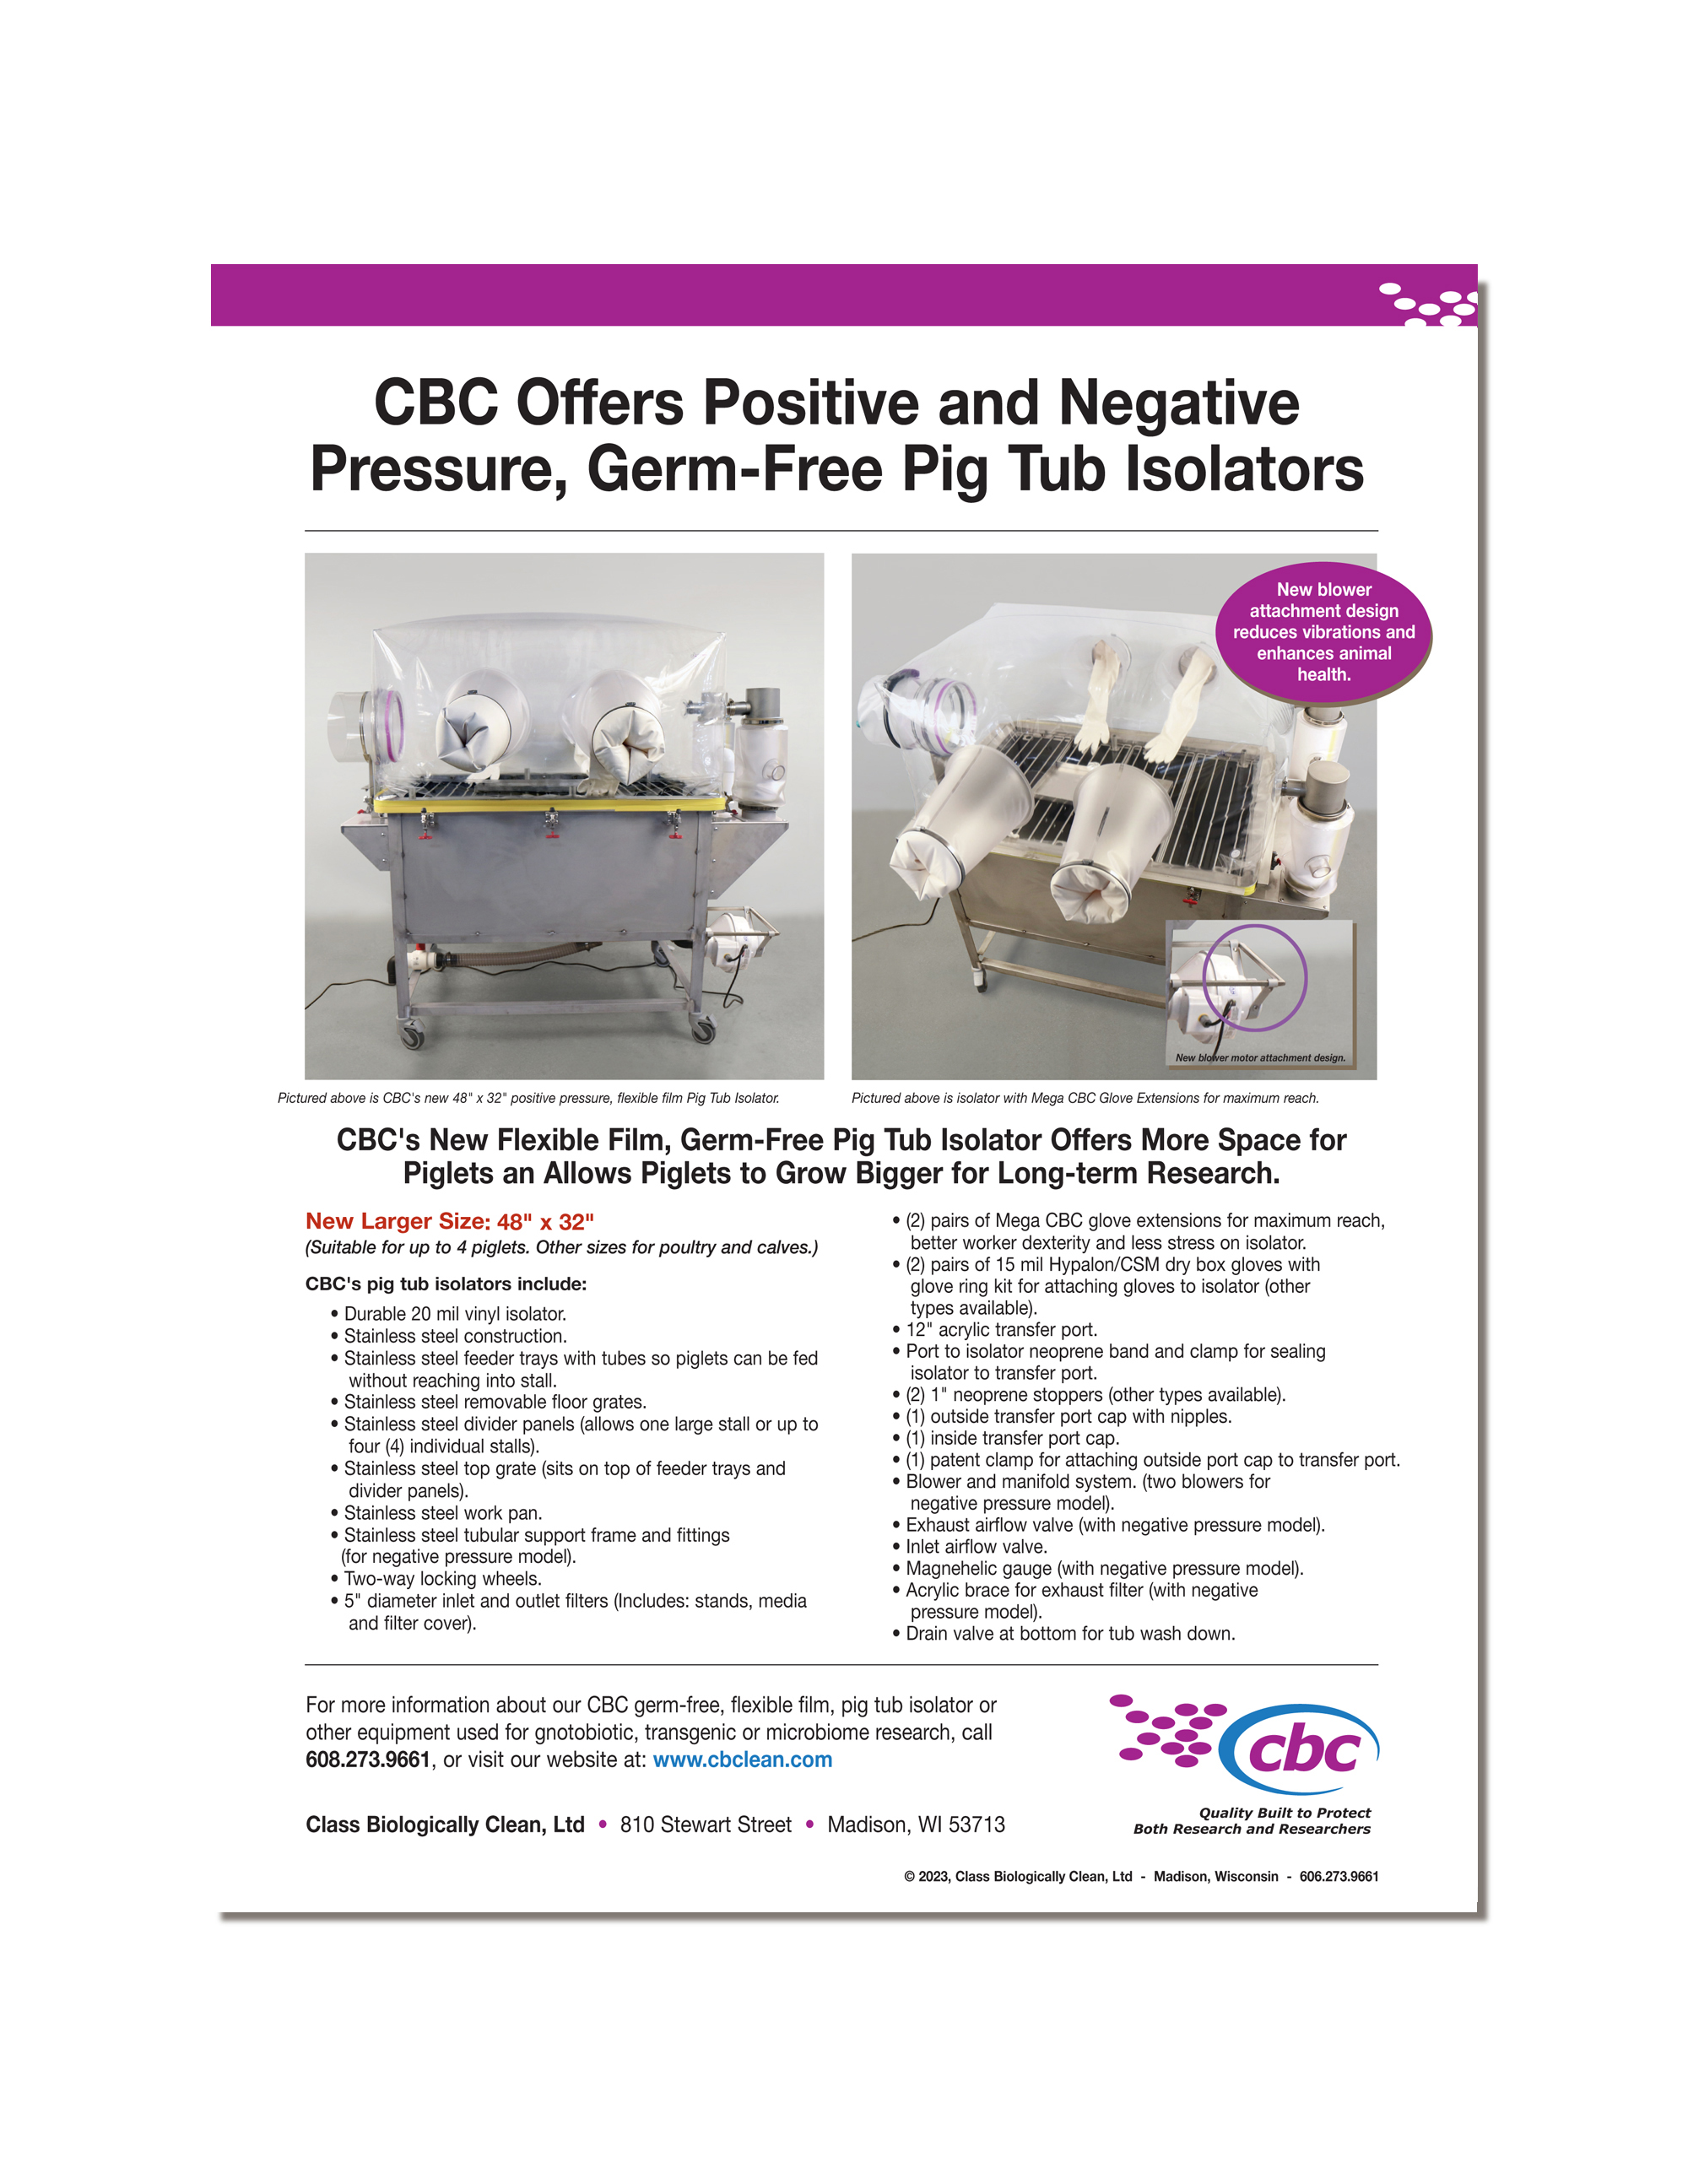 Download a printable flyer about the CBC flexible film, pig tub isolator system. Click here to download flyer.